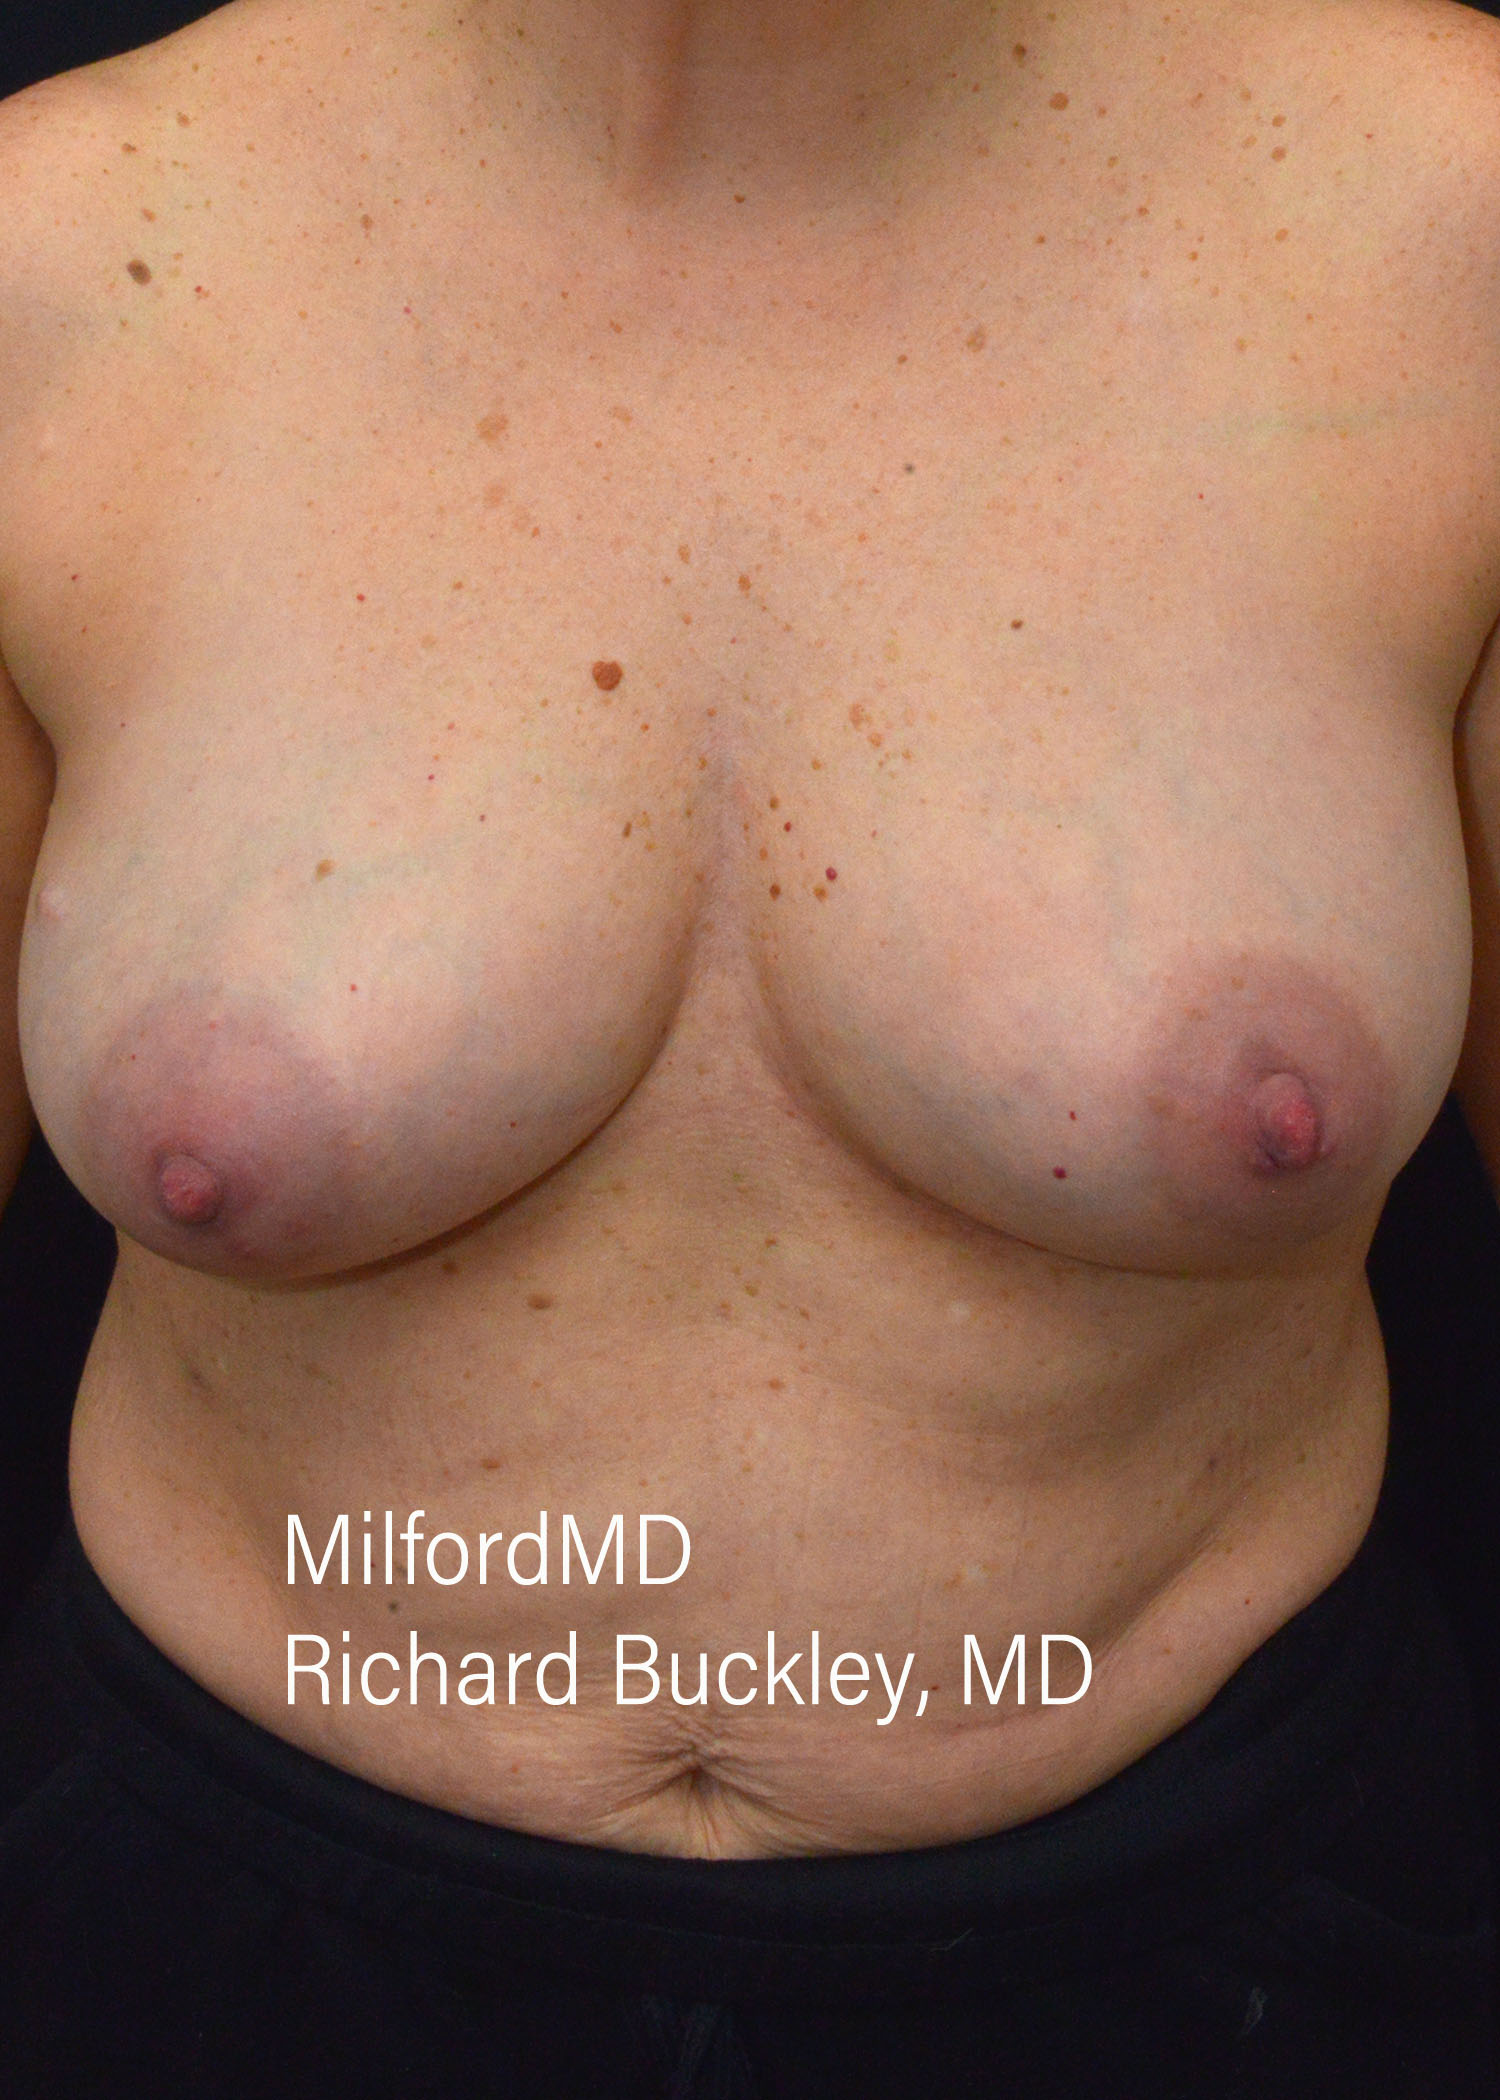 Breast Augmentation Before and After Photos,Breast Augmentation Before and After,Breast Augmentation Before & After Photos,Before and After Breast Augmentation,Breast Augmentation Before & After Gallery, Breast Augmentation